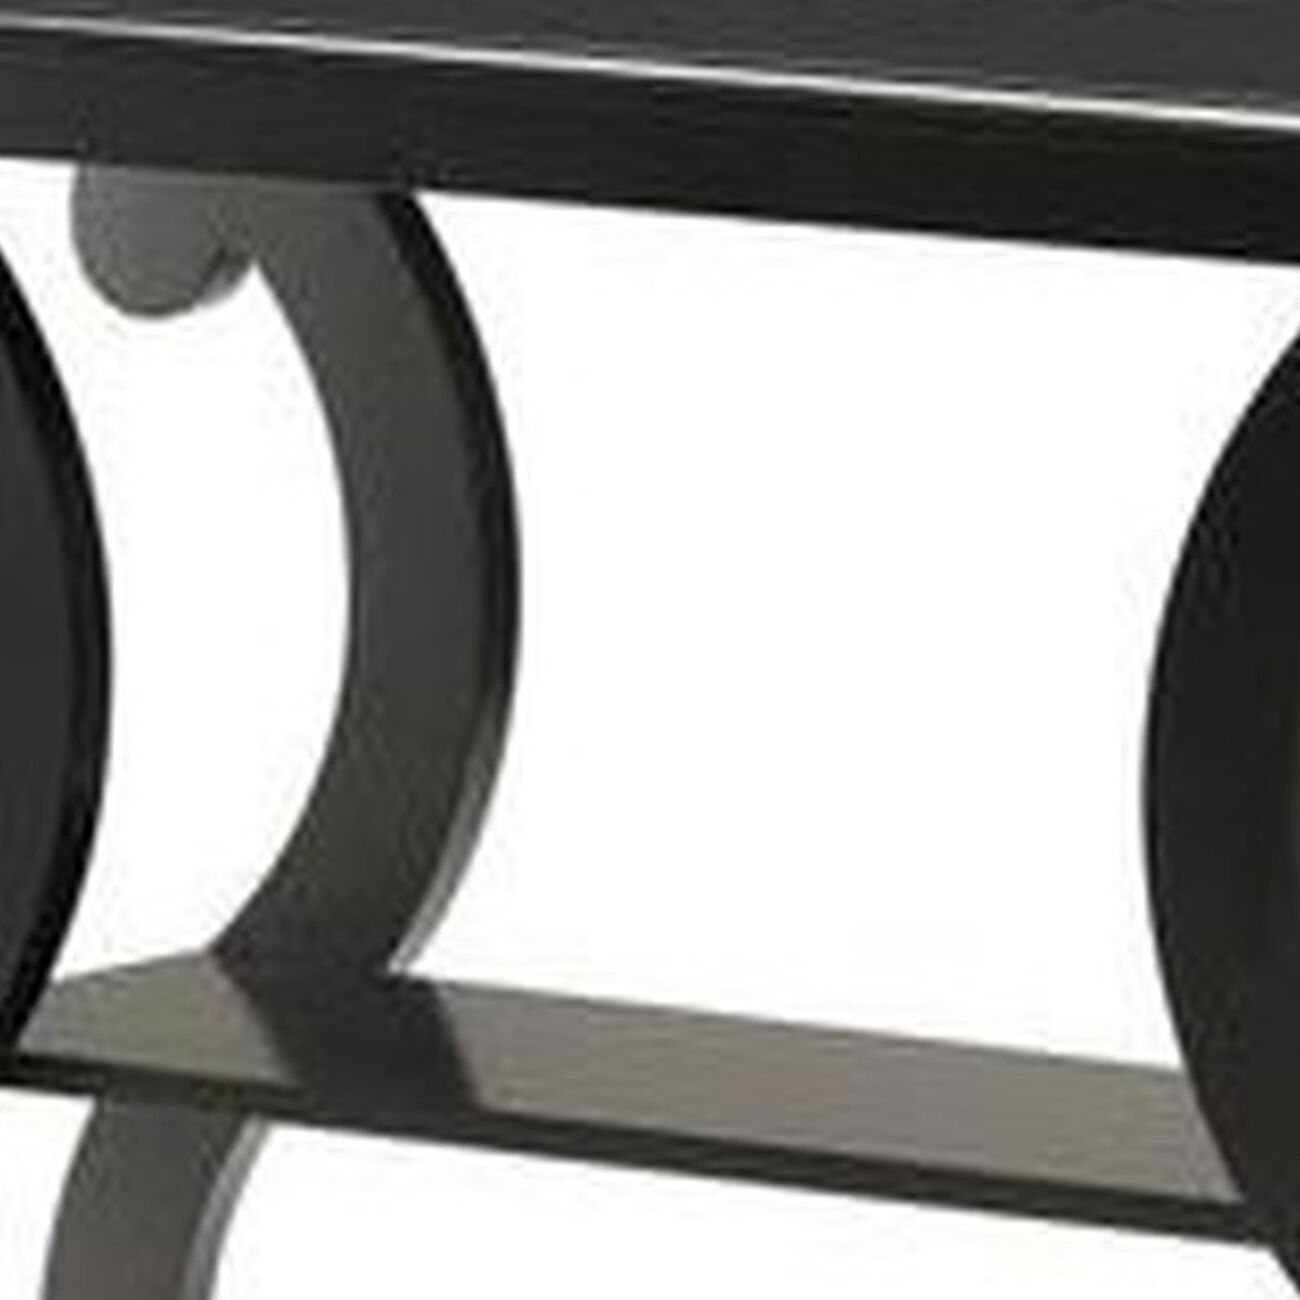 Contemporary Wooden Console Table with 2 Open Bottom Shelves, Black